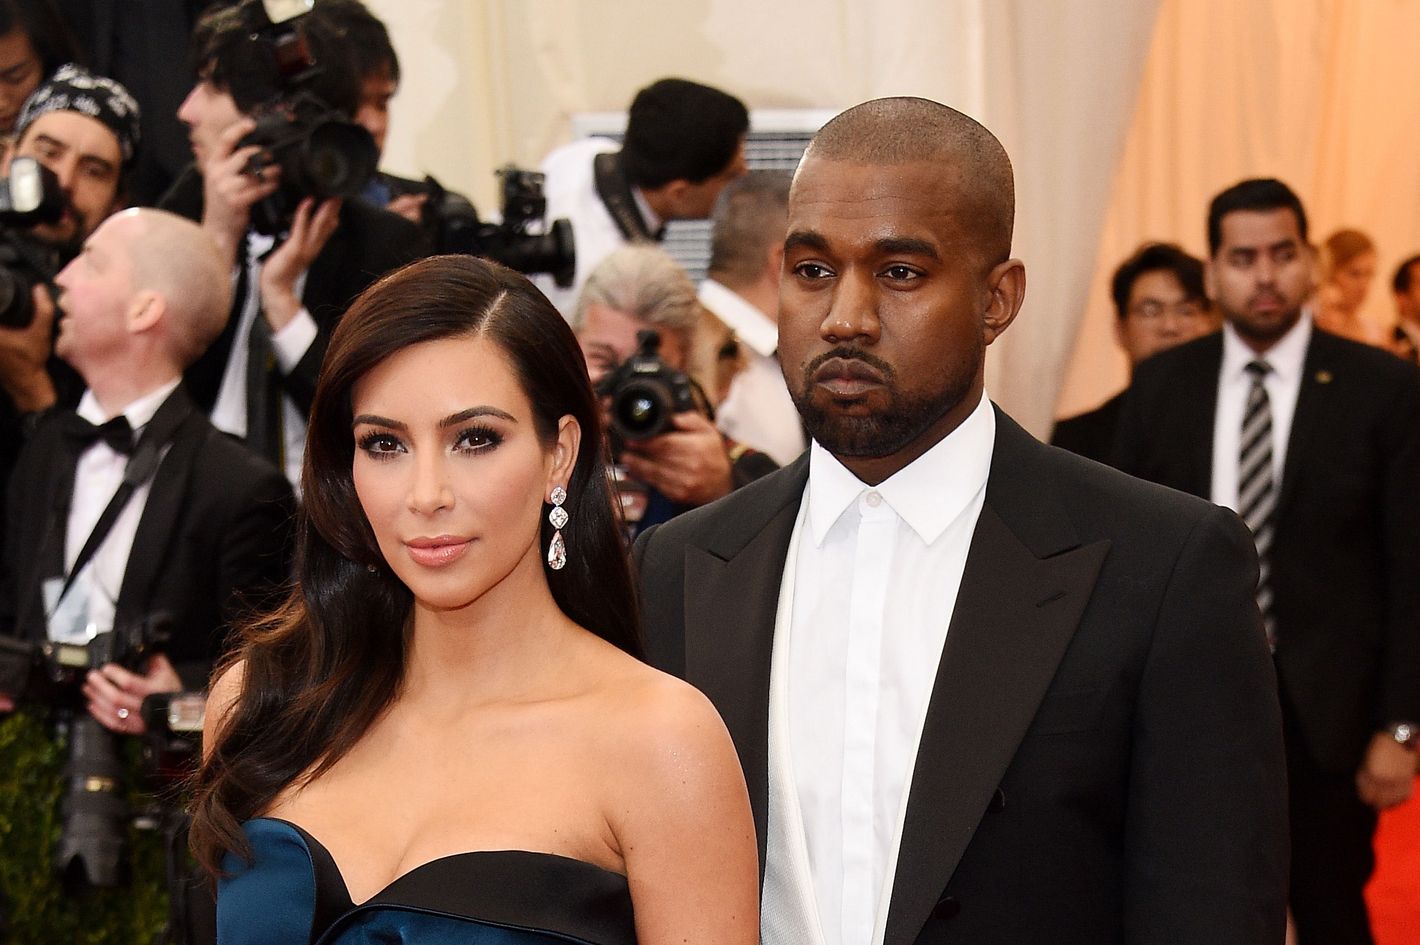 Don't Believe Anything You Read About Kimye's Wedding